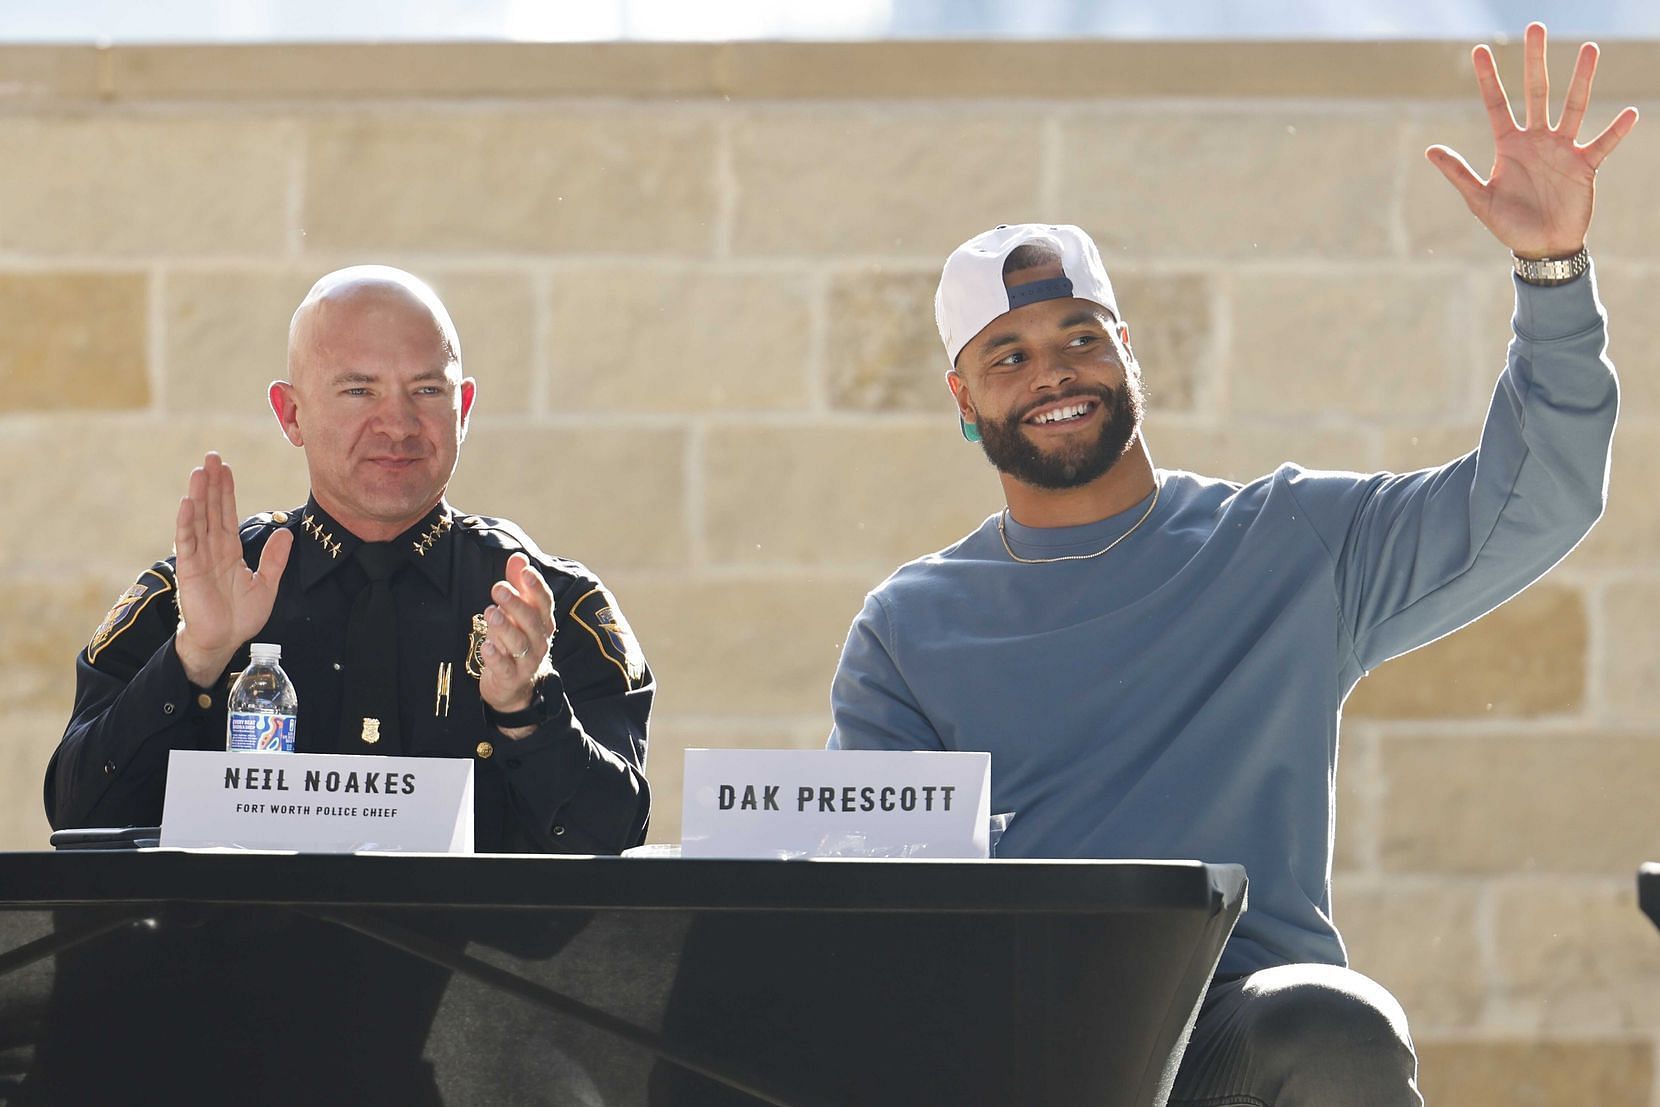 Dak Prescott during the town hall discussion after the shooting in Uvalde, Texas